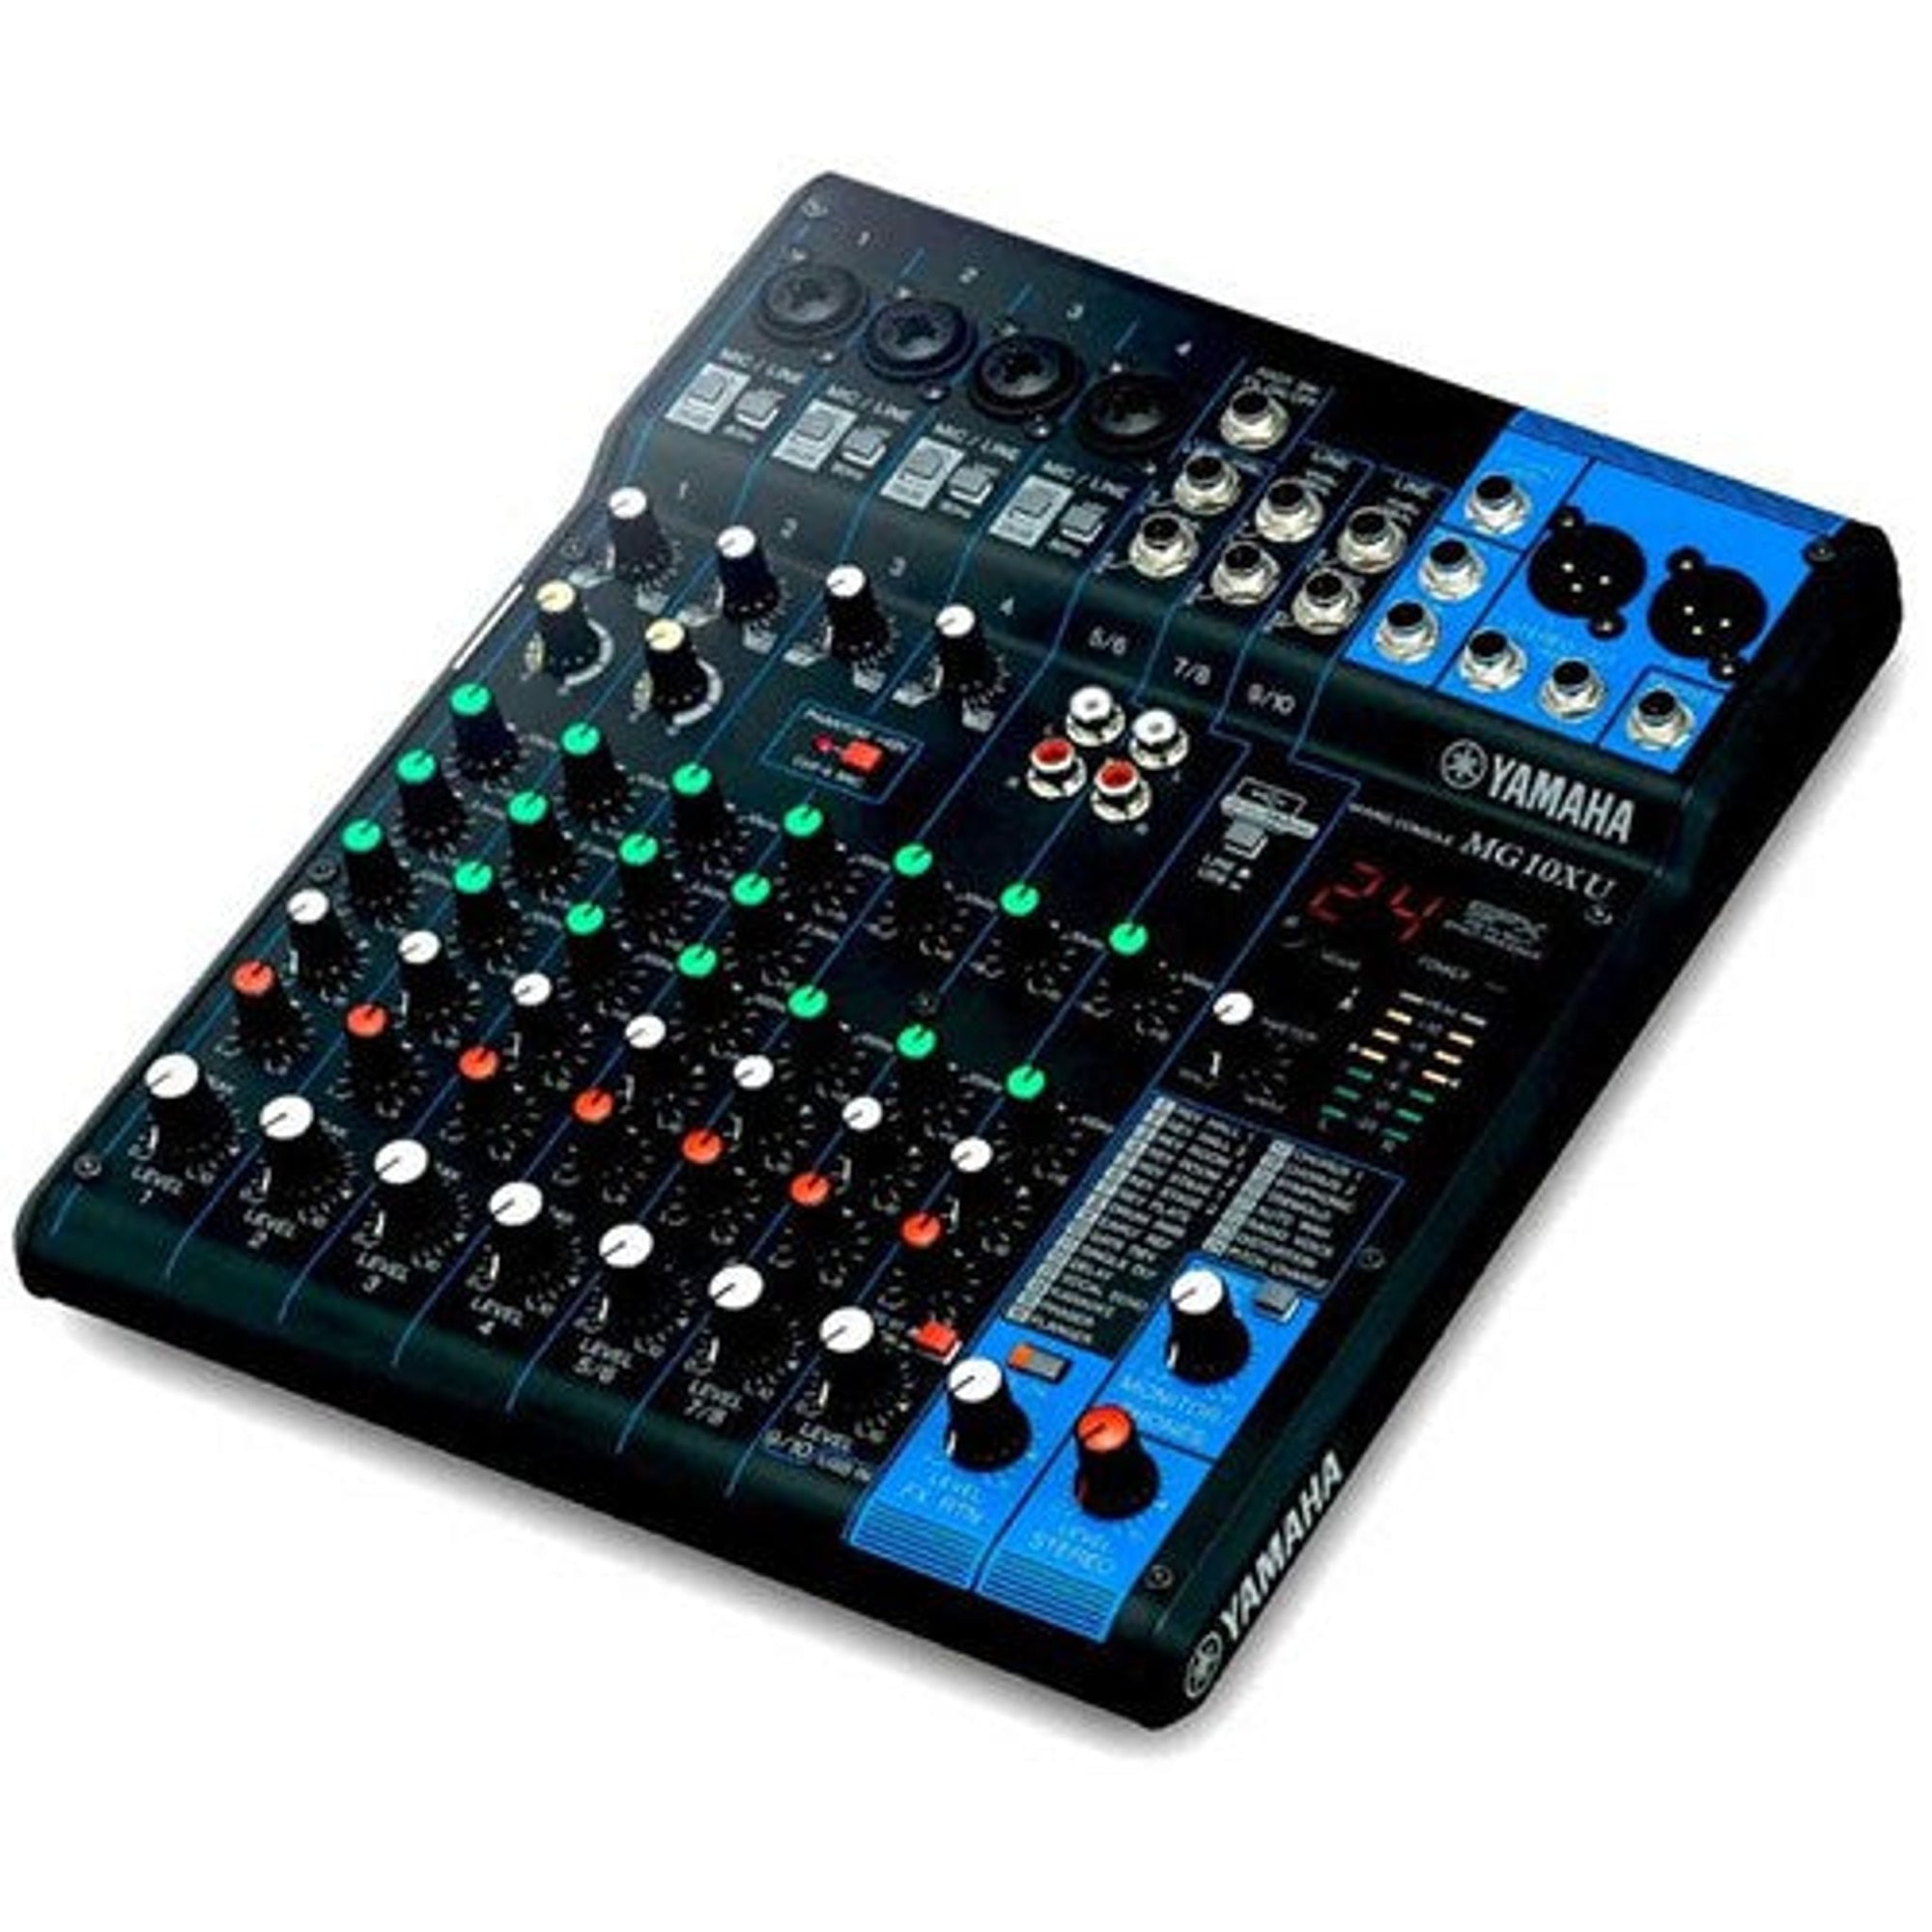 Now in its third incarnation, the Yamaha MG Mixer Series embodies this pursuit of design excellence, and incorporates some of the same technologies developed for use in high-end professional consoles, including studio-quality preamps, powerful digital processing, and a rugged, reliable construction.